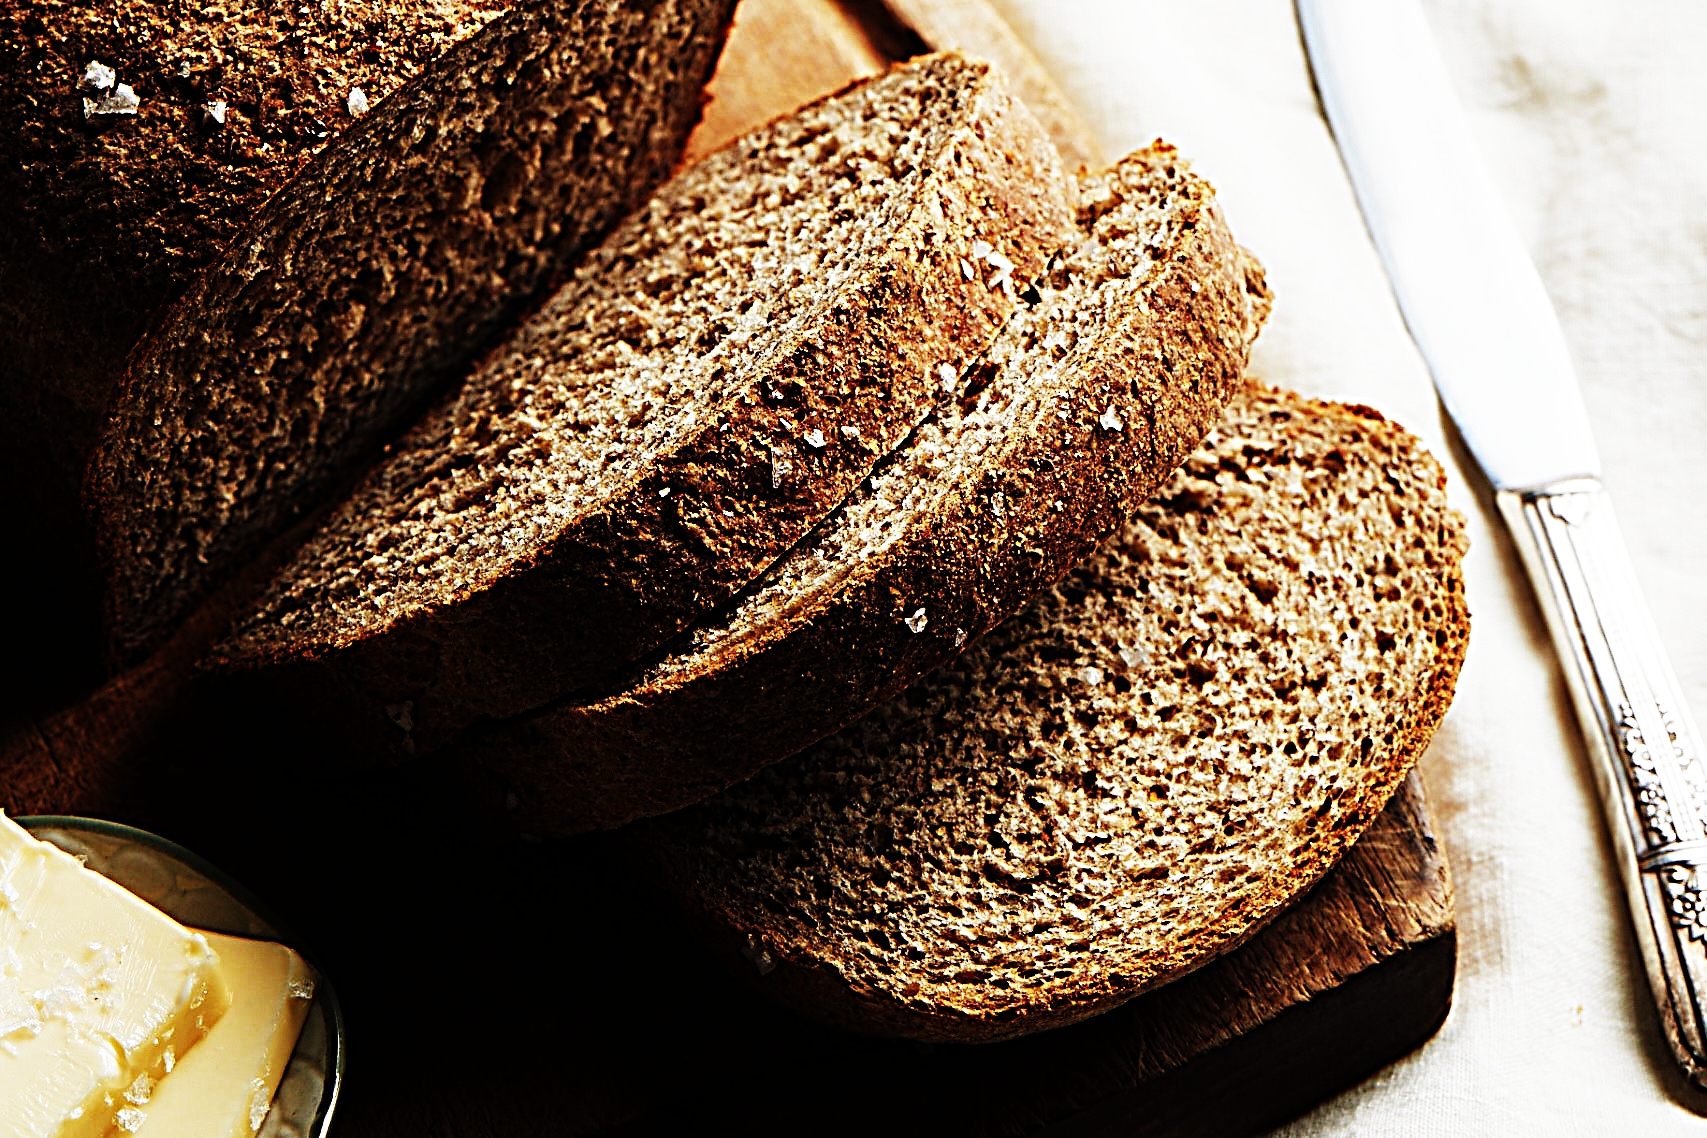 Stupid-Easy Recipe for Whole Wheat Flax Seed Bread (#1 Top-Rated)